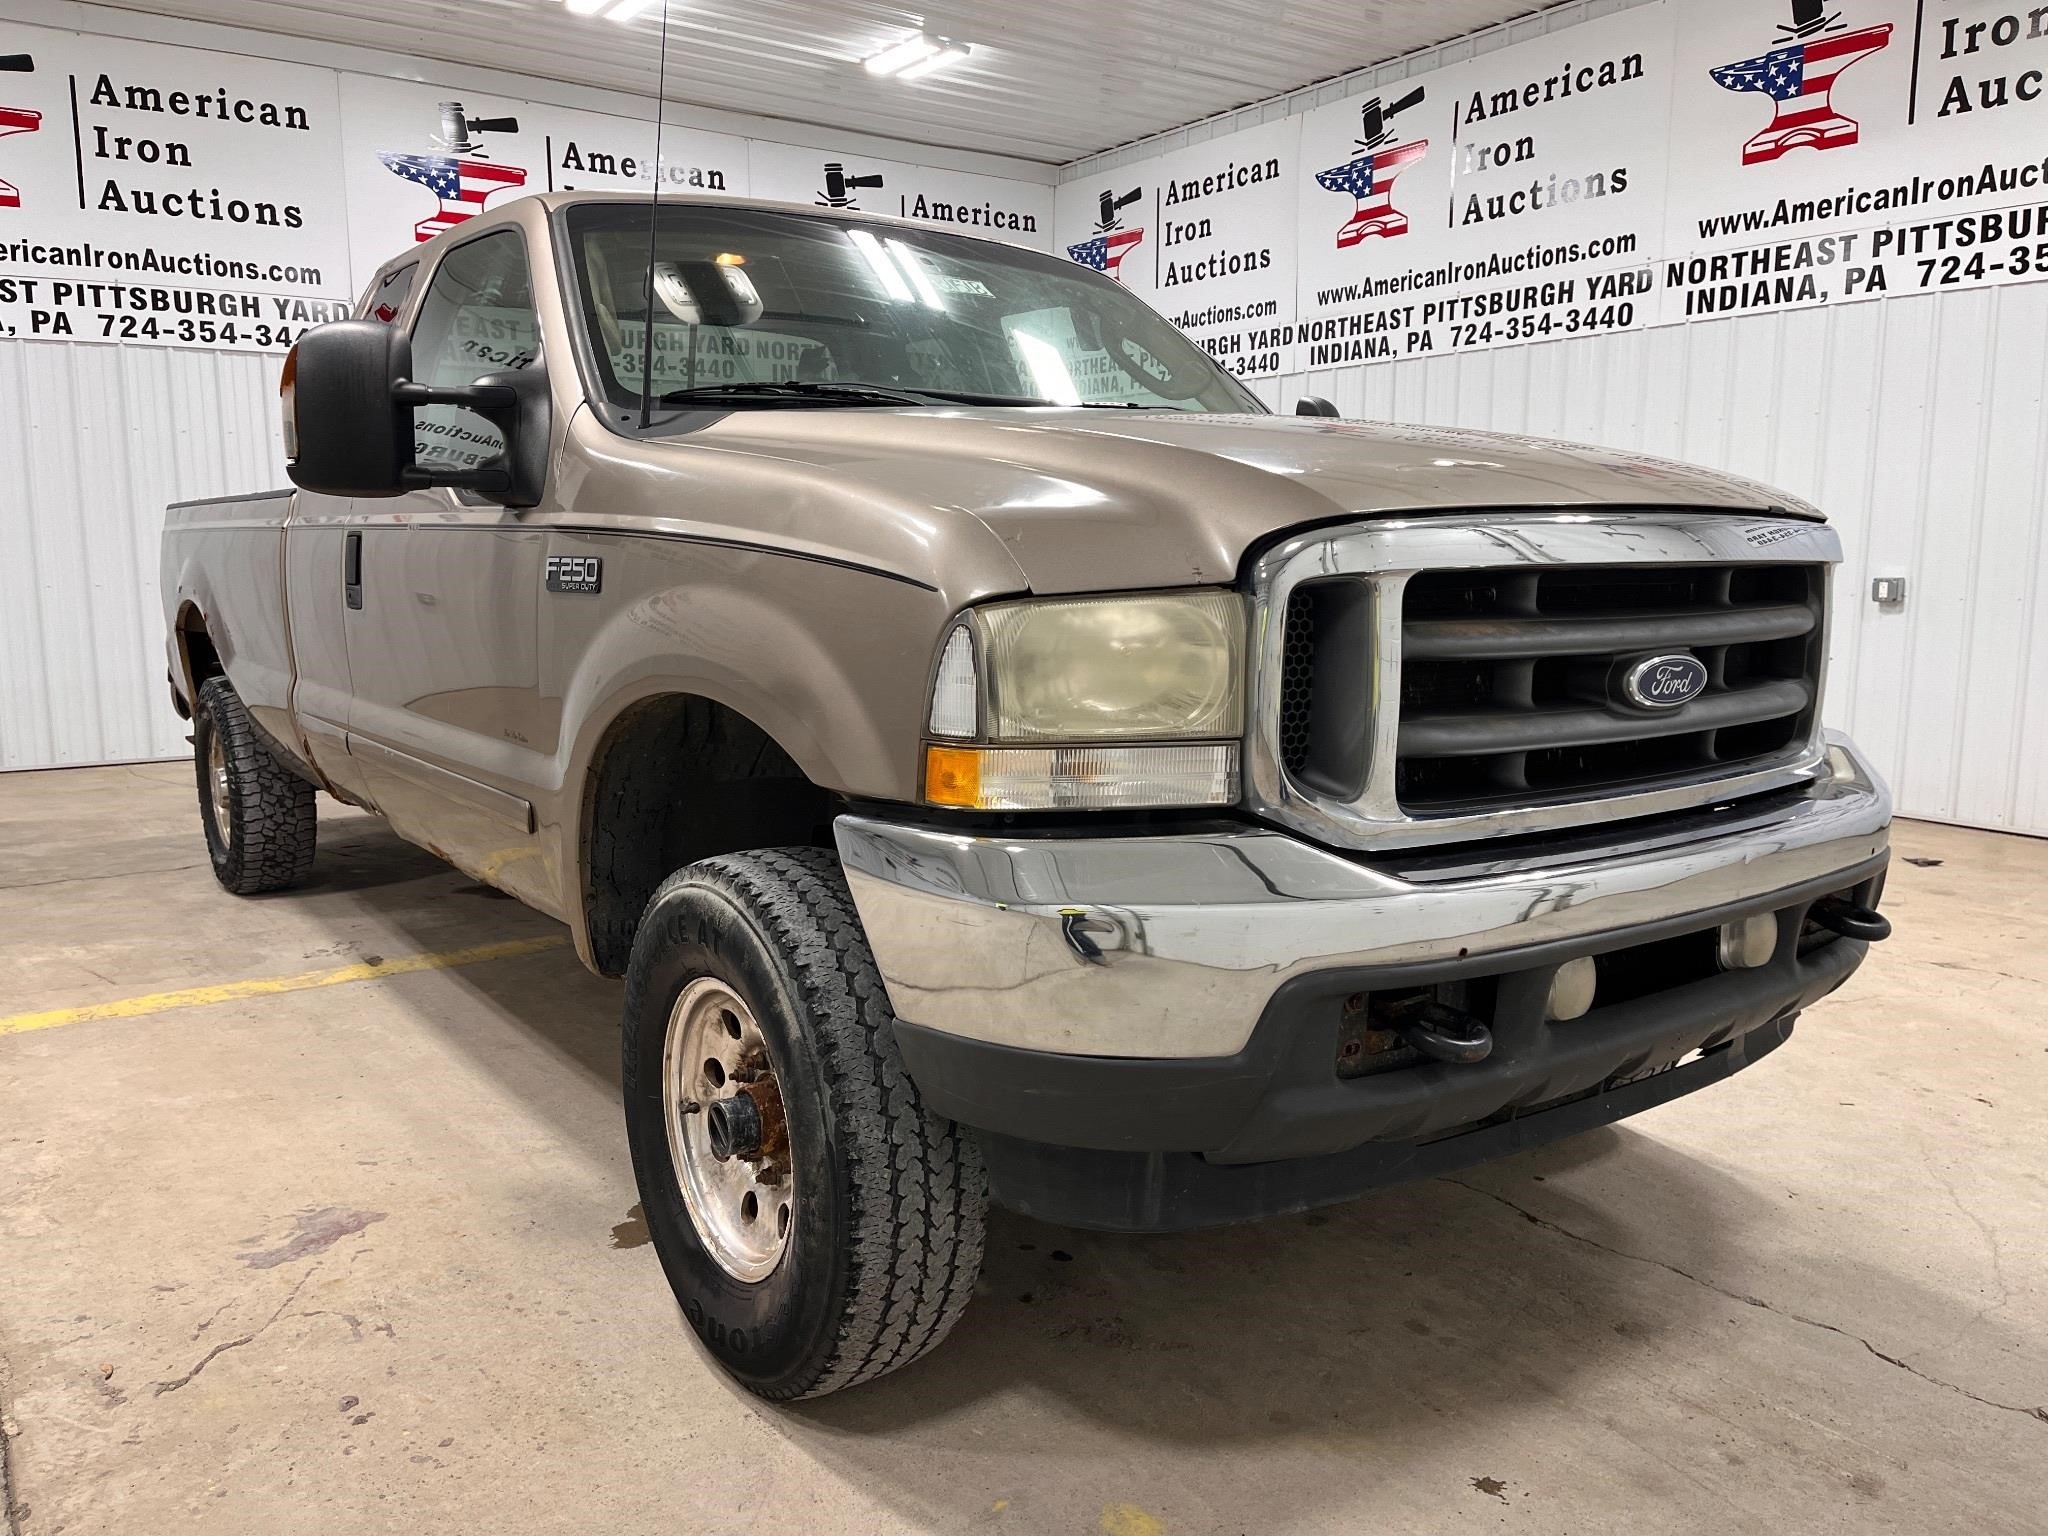 2003 Ford F250 XL Truck - Titled- NO RESERVE